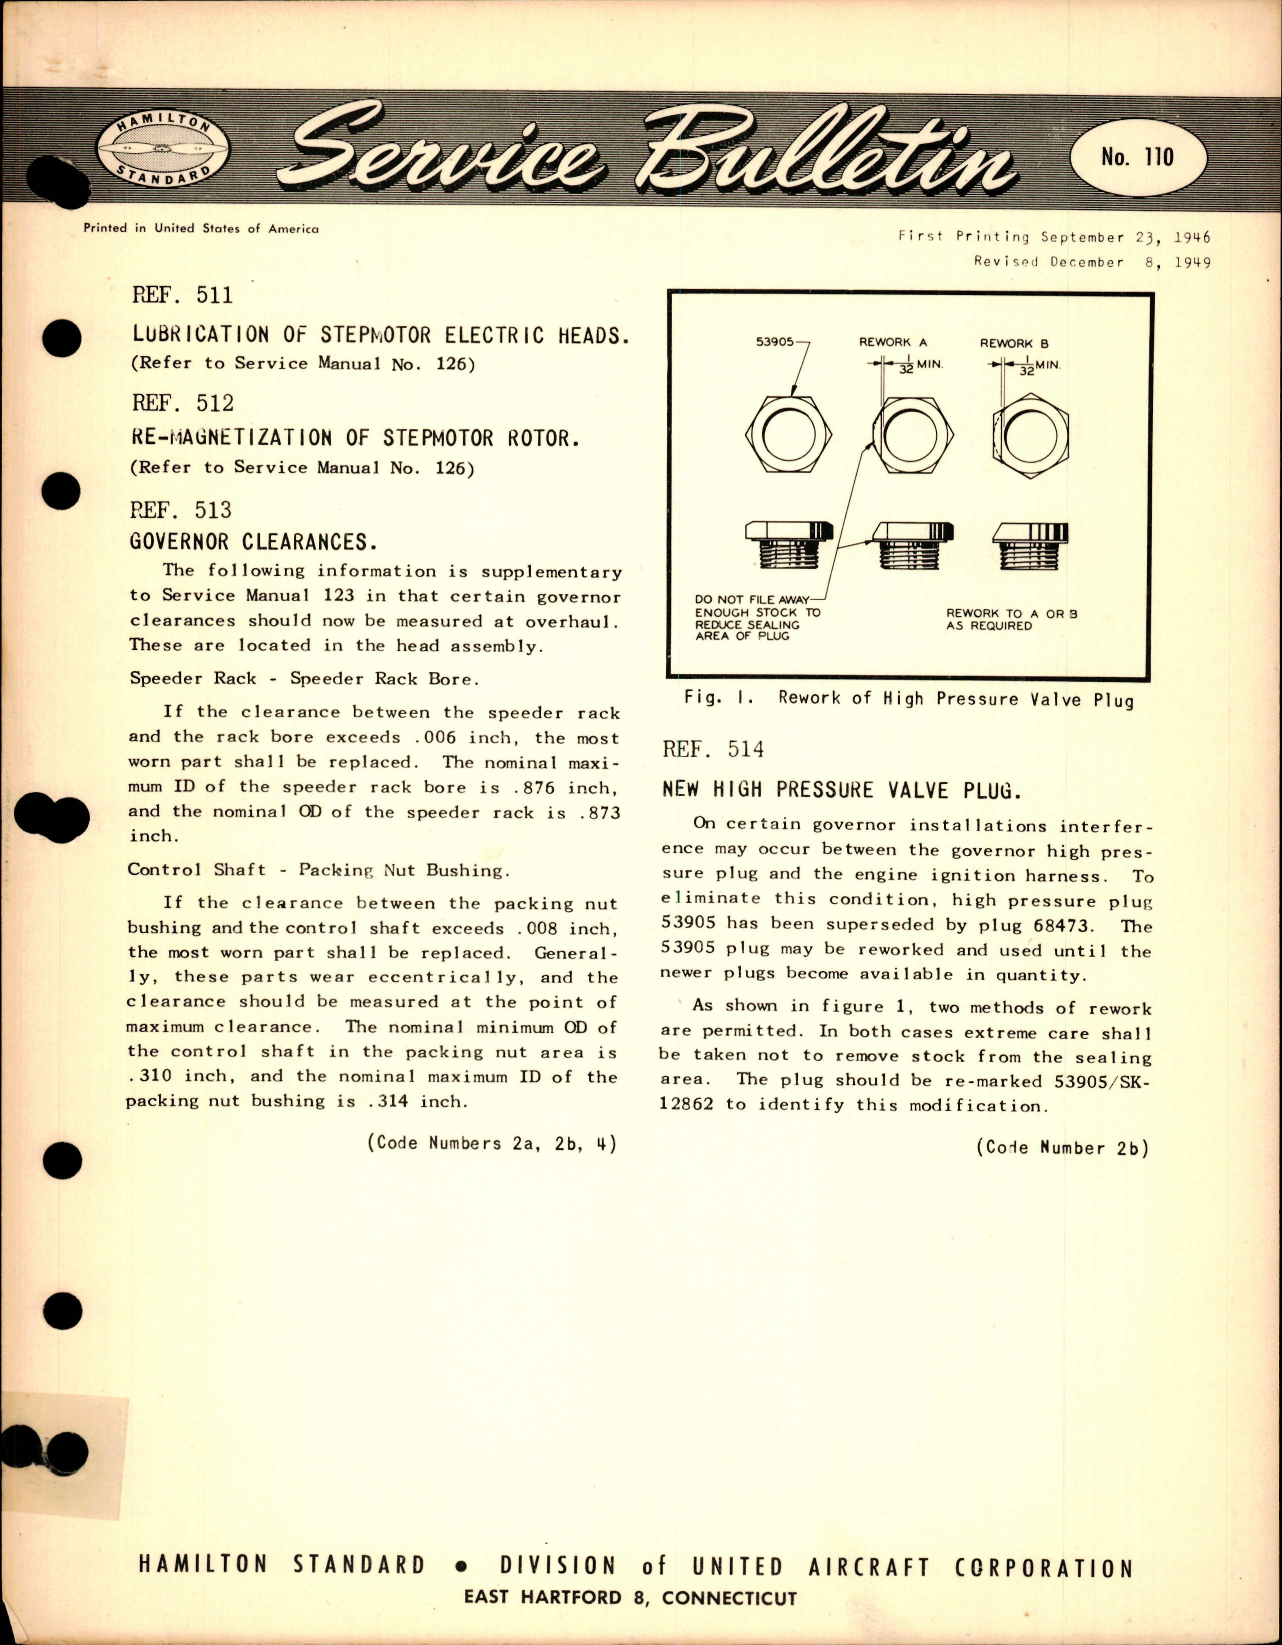 Sample page 1 from AirCorps Library document: Lubrication of Stepmotor Electric Heads, Ref 511